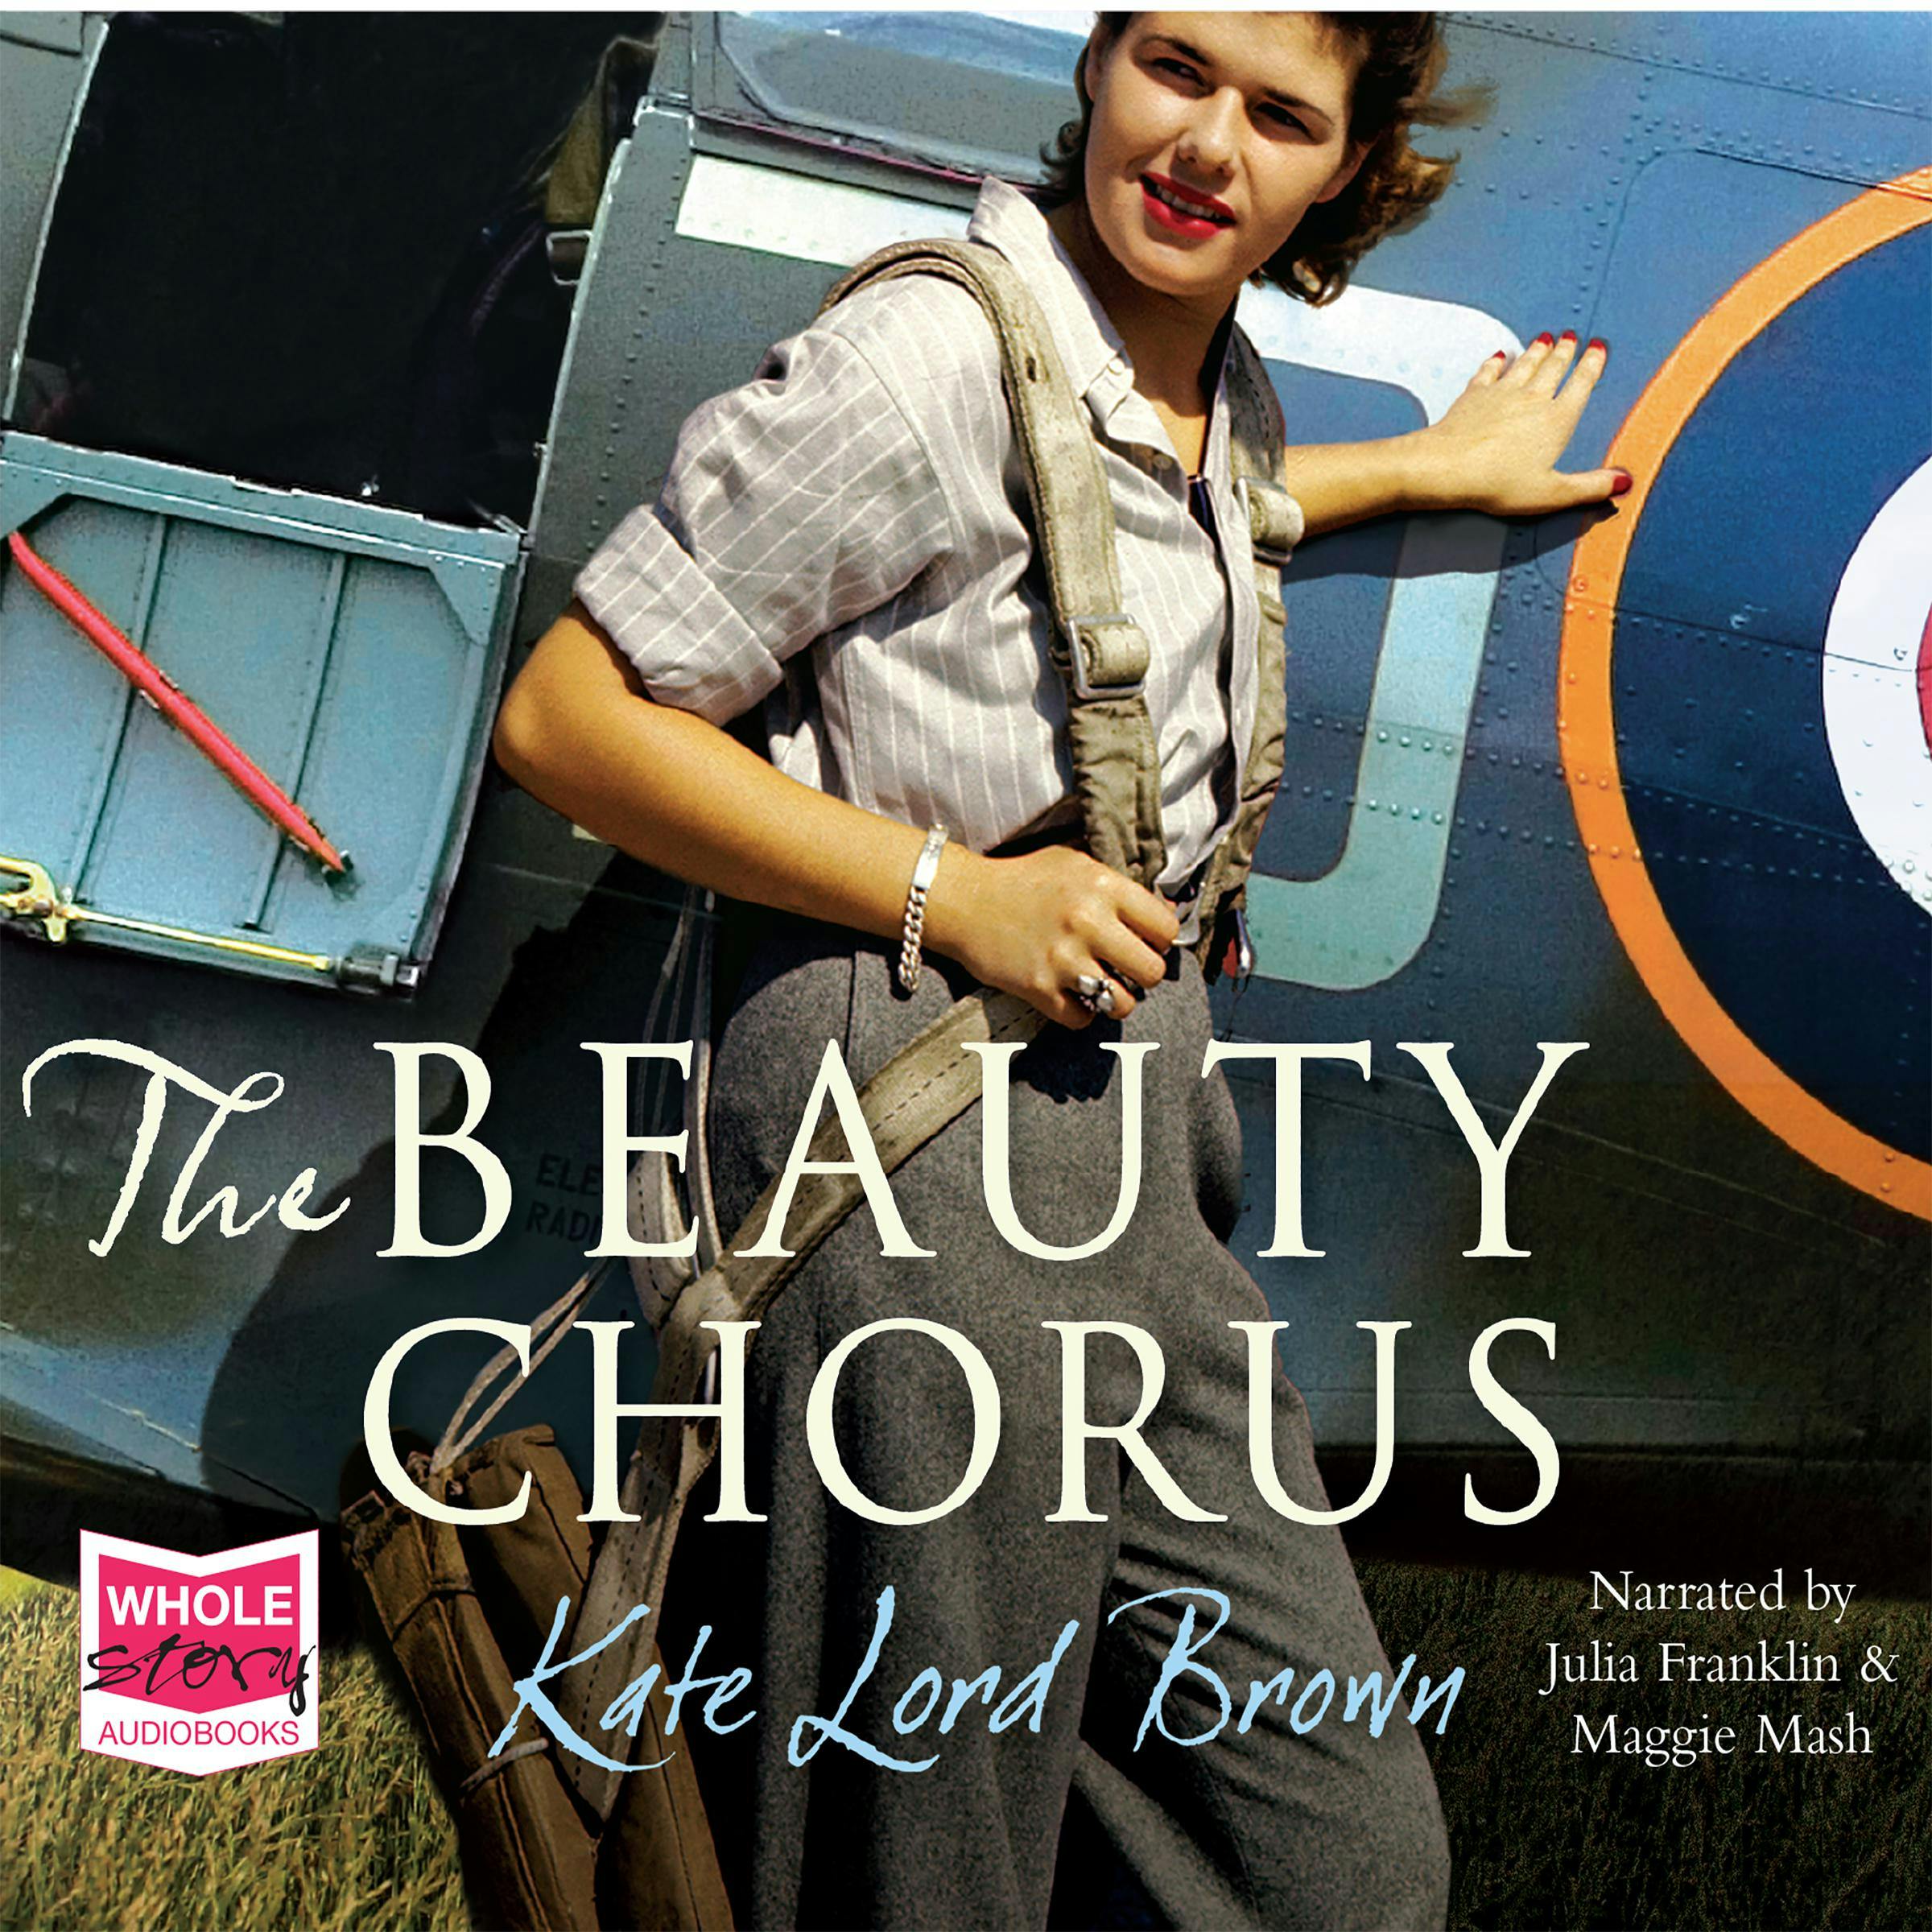 The Beauty Chorus - Kate Lord Brown